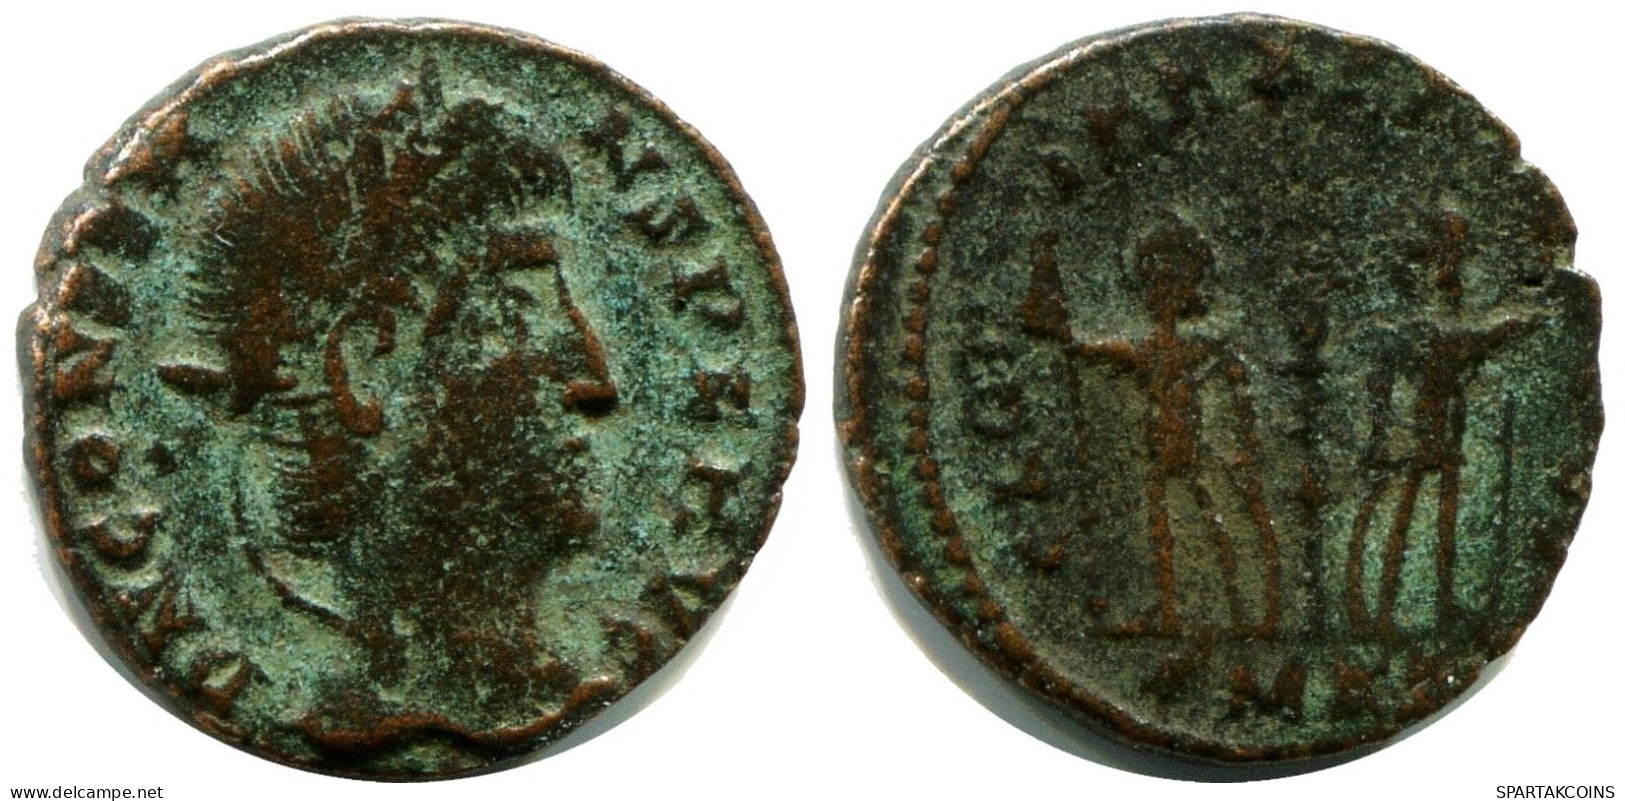 CONSTANS MINTED IN CYZICUS FROM THE ROYAL ONTARIO MUSEUM #ANC11638.14.U.A - The Christian Empire (307 AD To 363 AD)